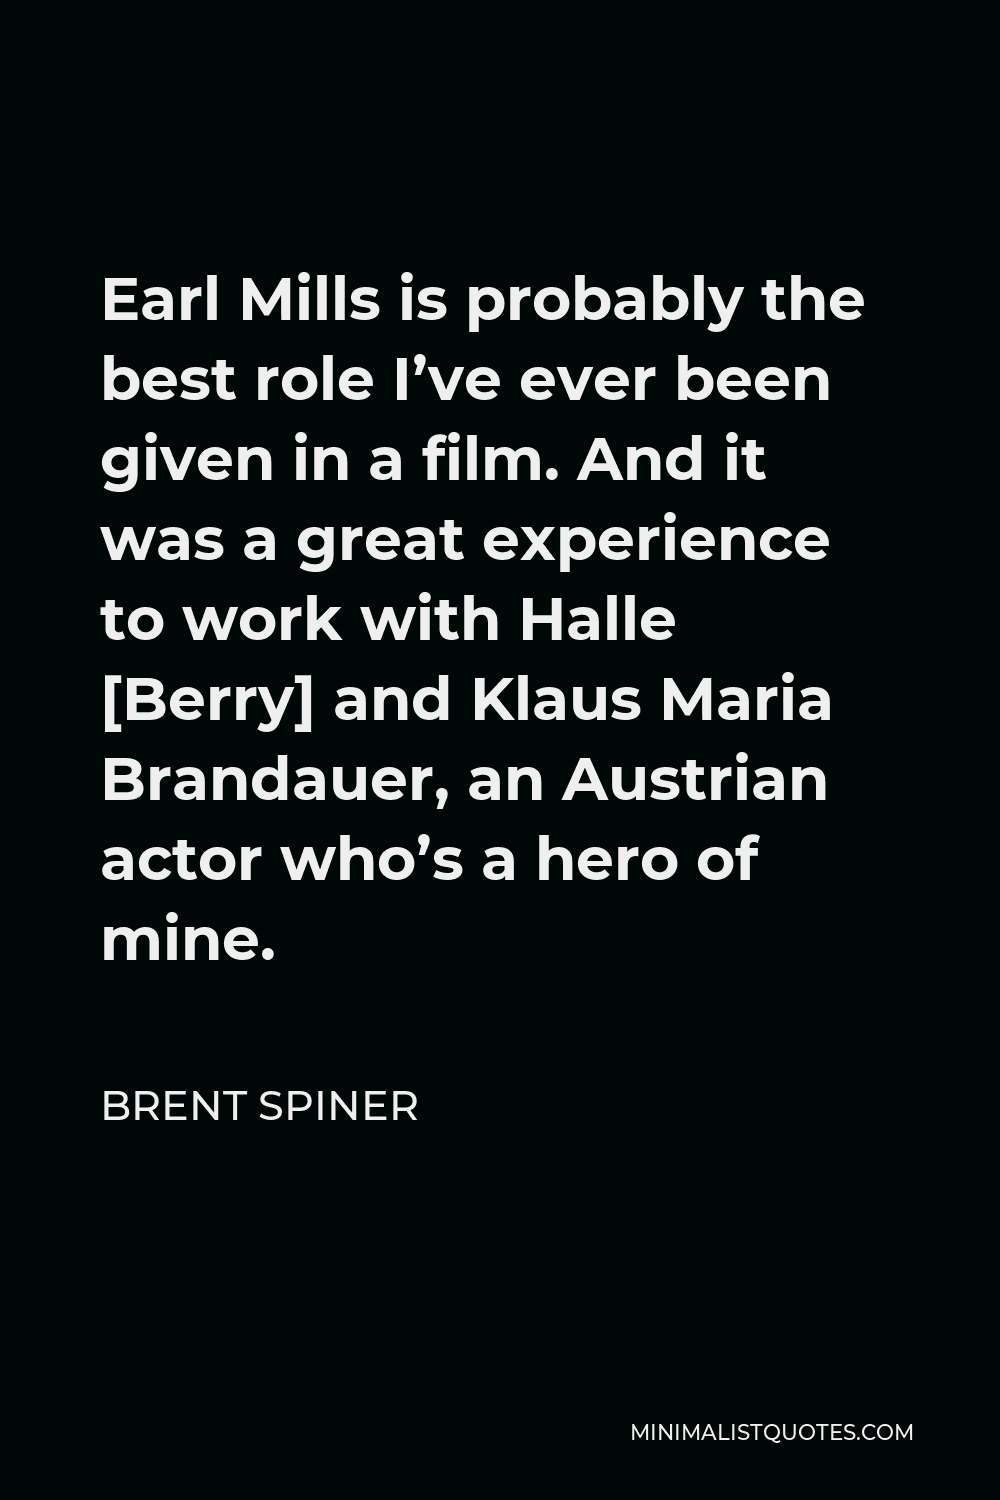 Brent Spiner Quote - Earl Mills is probably the best role I’ve ever been given in a film. And it was a great experience to work with Halle [Berry] and Klaus Maria Brandauer, an Austrian actor who’s a hero of mine.